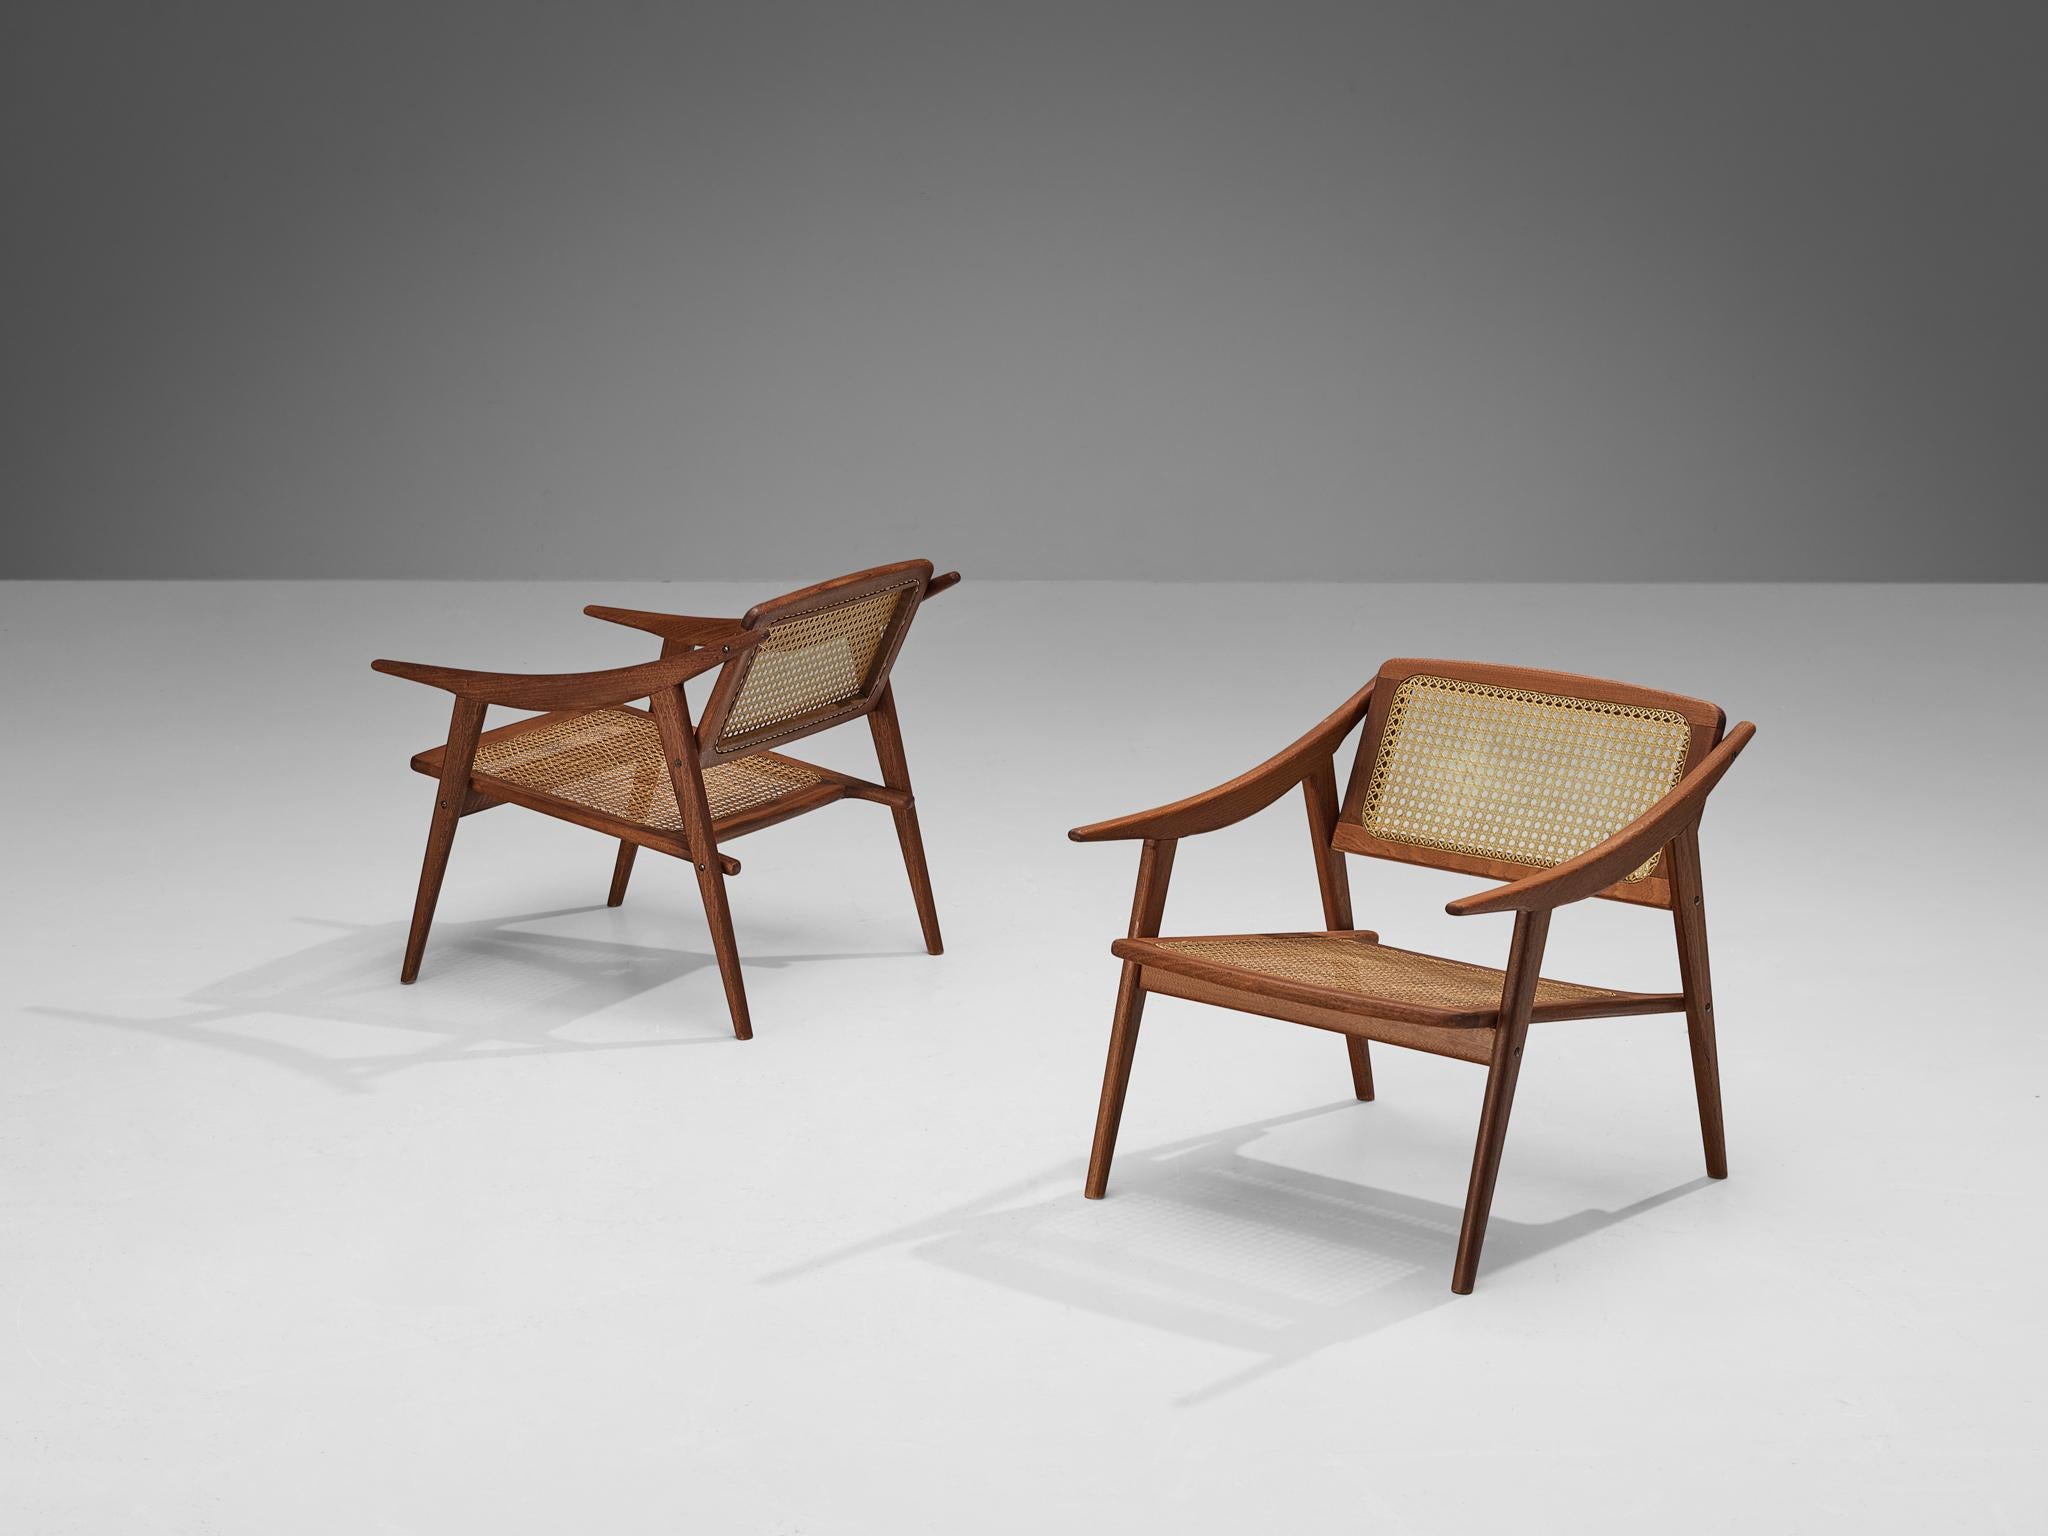 Michel Ducaroy for SNA Roset, pair of armchairs, teak, cane, France, 1950s

In the 1950s, the French designer Michel Ducaroy designed these elegant lounge chairs as part of his collection for his own furniture company, SNA Roset. These chairs are a